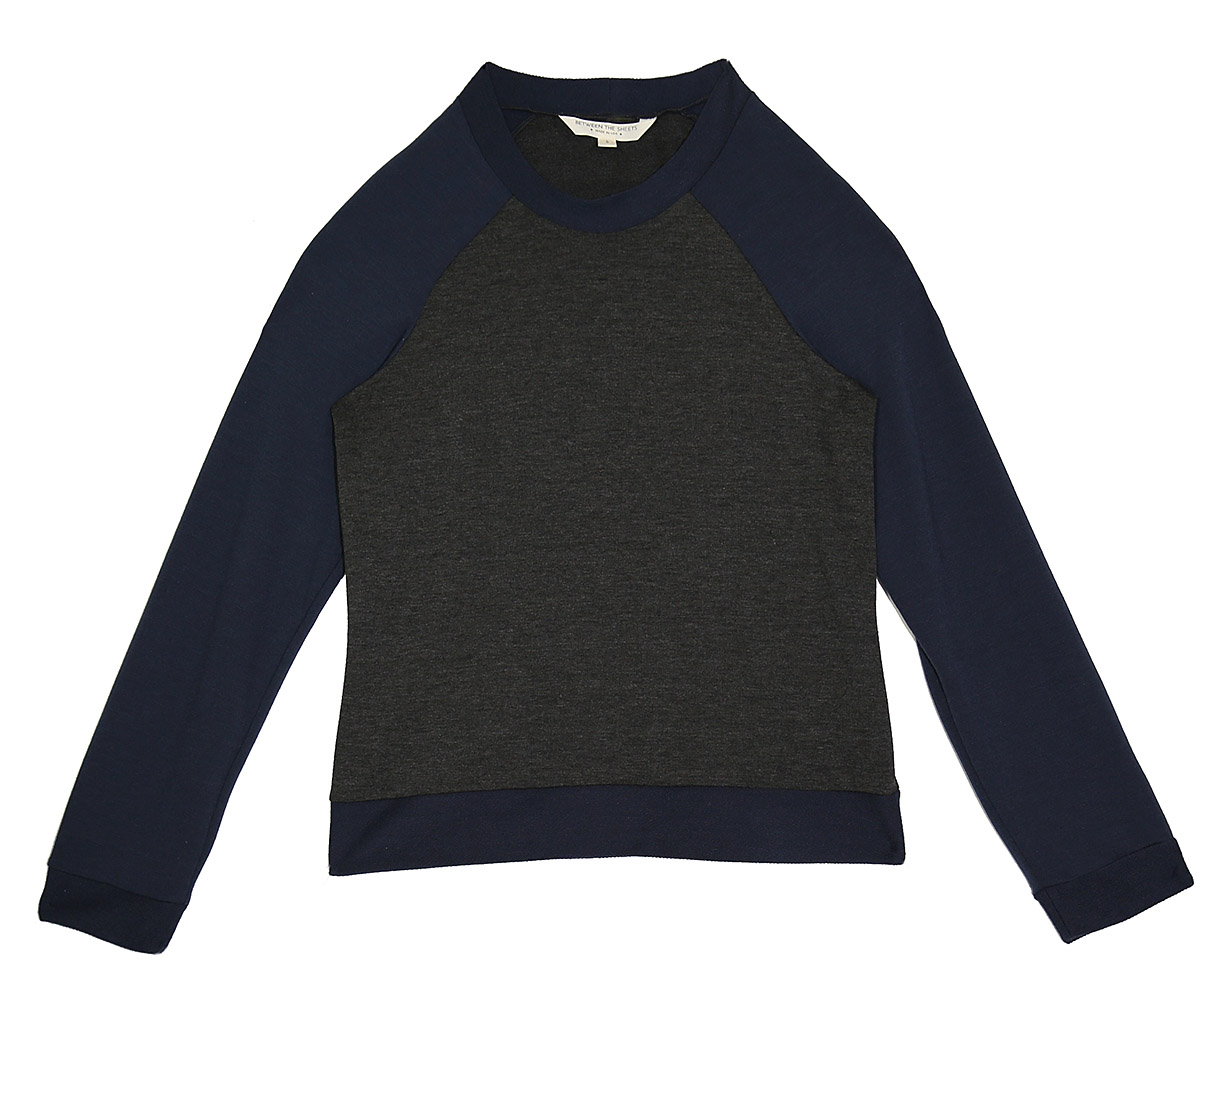 Make a Pass Charcoal Navy Raglan Long Sleeve Pullover | Color Blocked Warmups | Luxury Athleisure | Between the Sheets Loungewear